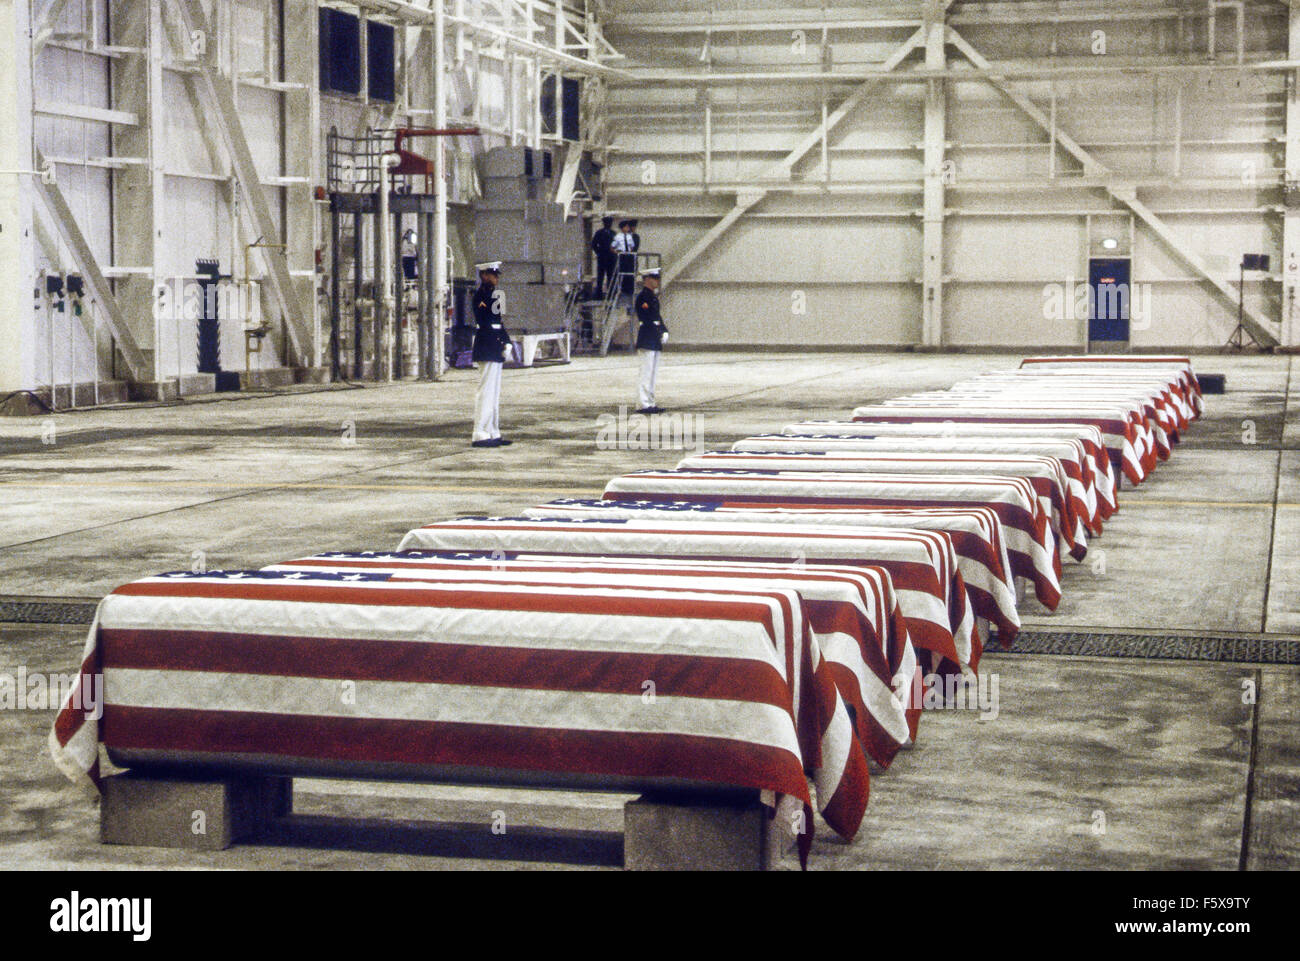 Dover Air Force Base, Delaware. USA 29th October 1983 At precisely 7 A.M., a Marine honor guard and a color guard in ceremonial dress uniforms marched into a huge hangar at the Dover Air Force Base and stood facing 16 coffins. Behind them, suspended from the beams of the hangar, was a 38-foot American flag. The ceremony was the first on American soil honoring servicemen killed in the bombing in Beirut and the invasion of Grenada. Credit: Mark Reinstein Stock Photo